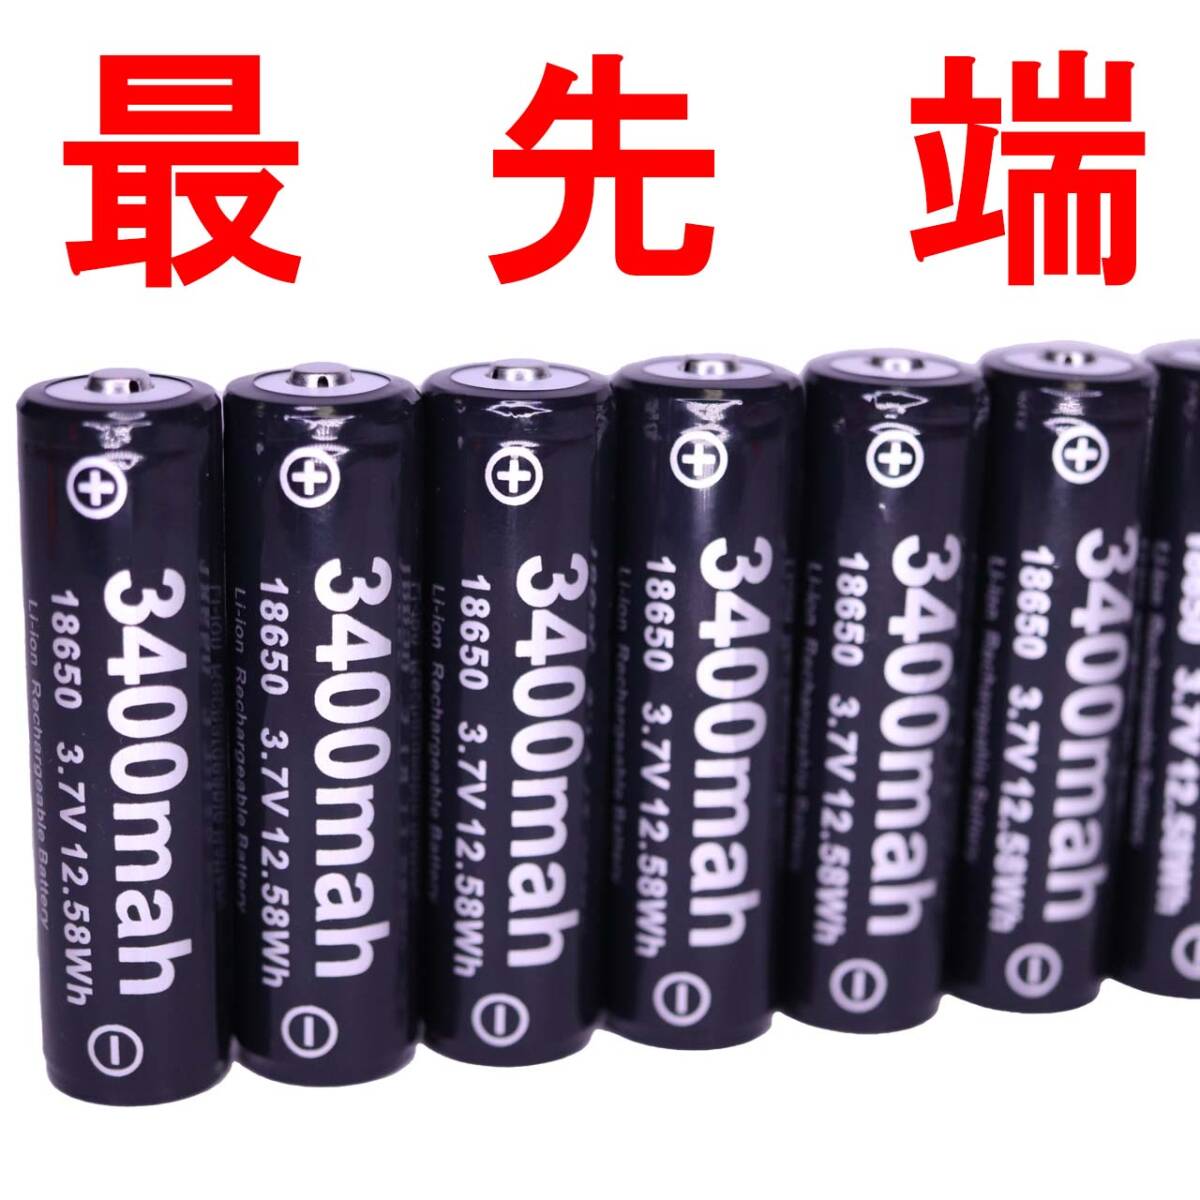 18650 lithium ion rechargeable battery battery PSE protection circuit flashlight head light handy light 3400mah 01